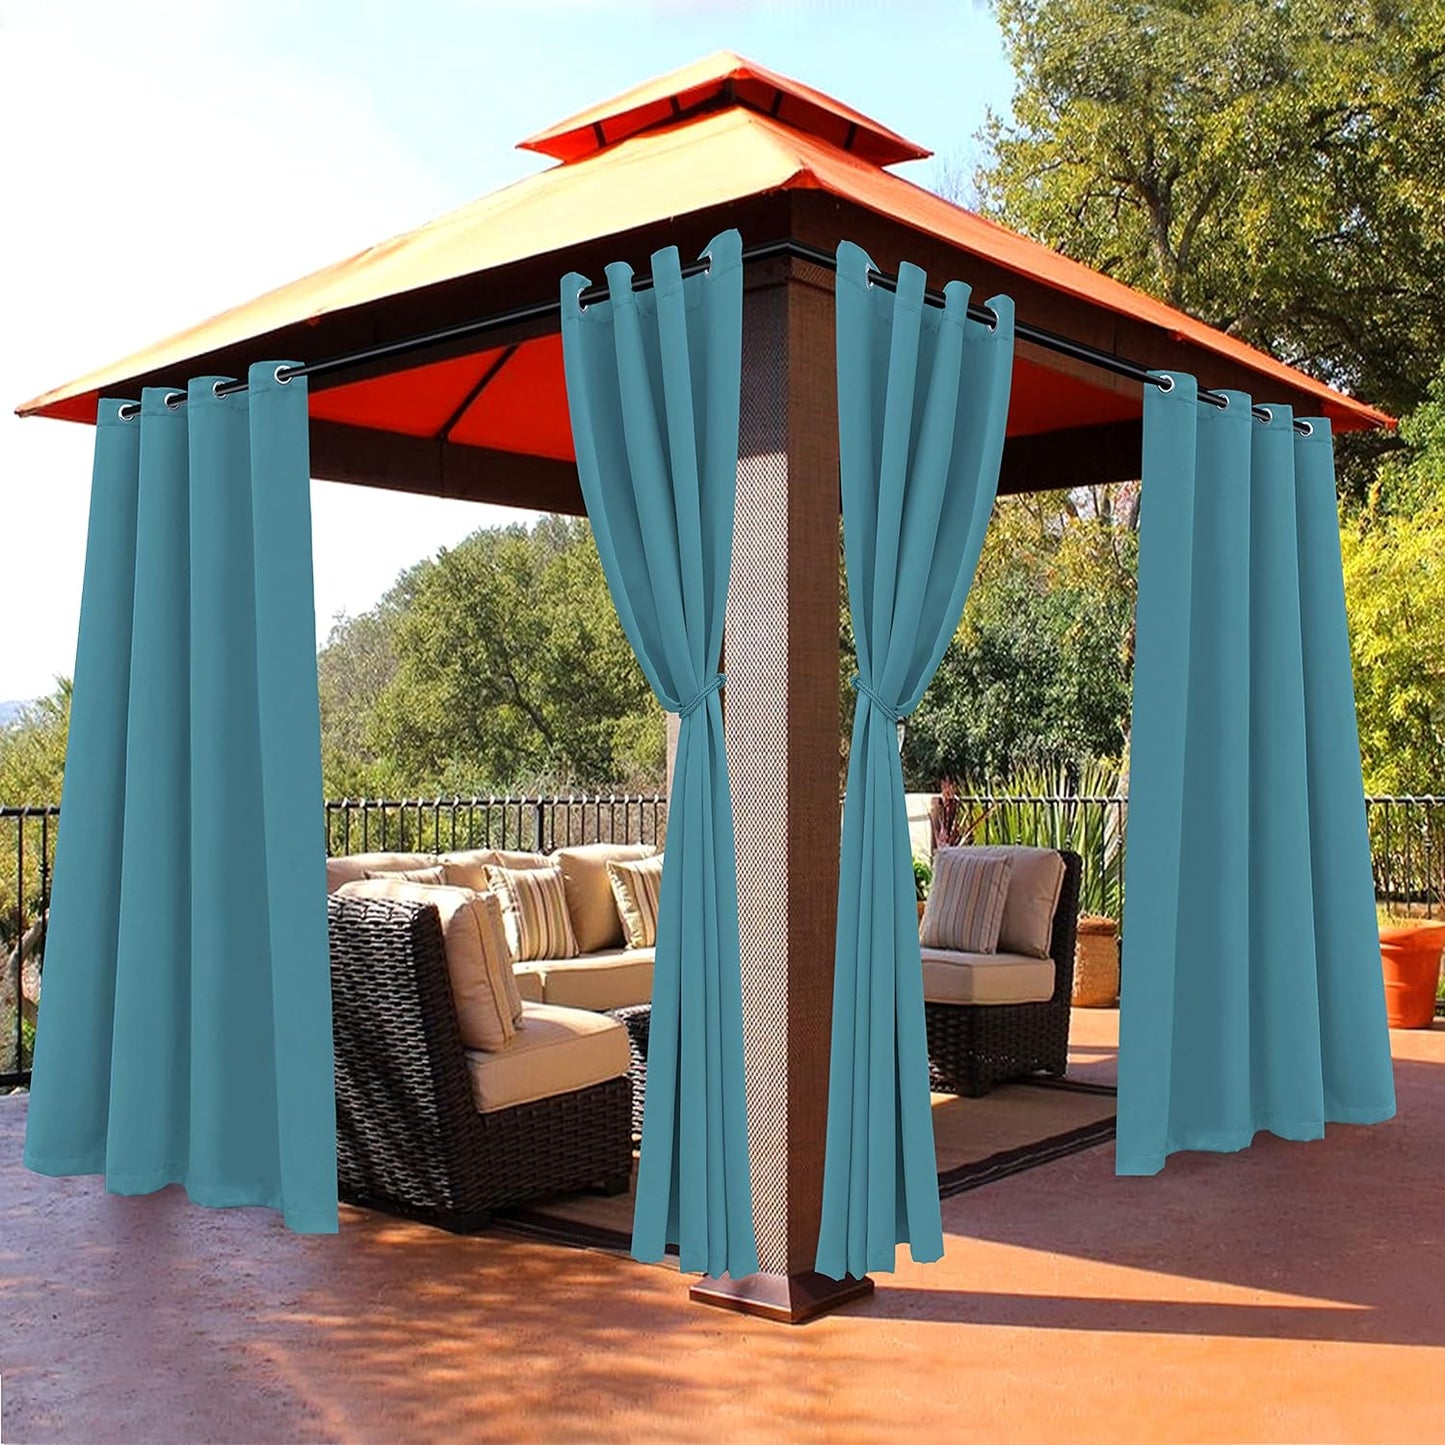 BONZER Outdoor Curtains for Patio Waterproof - Light Blocking Weather Resistant Privacy Grommet Blackout Curtains for Gazebo, Porch, Pergola, Cabana, Deck, Sunroom, 1 Panel, 52W X 84L Inch, Silver  BONZER Teal 52W X 95 Inch 